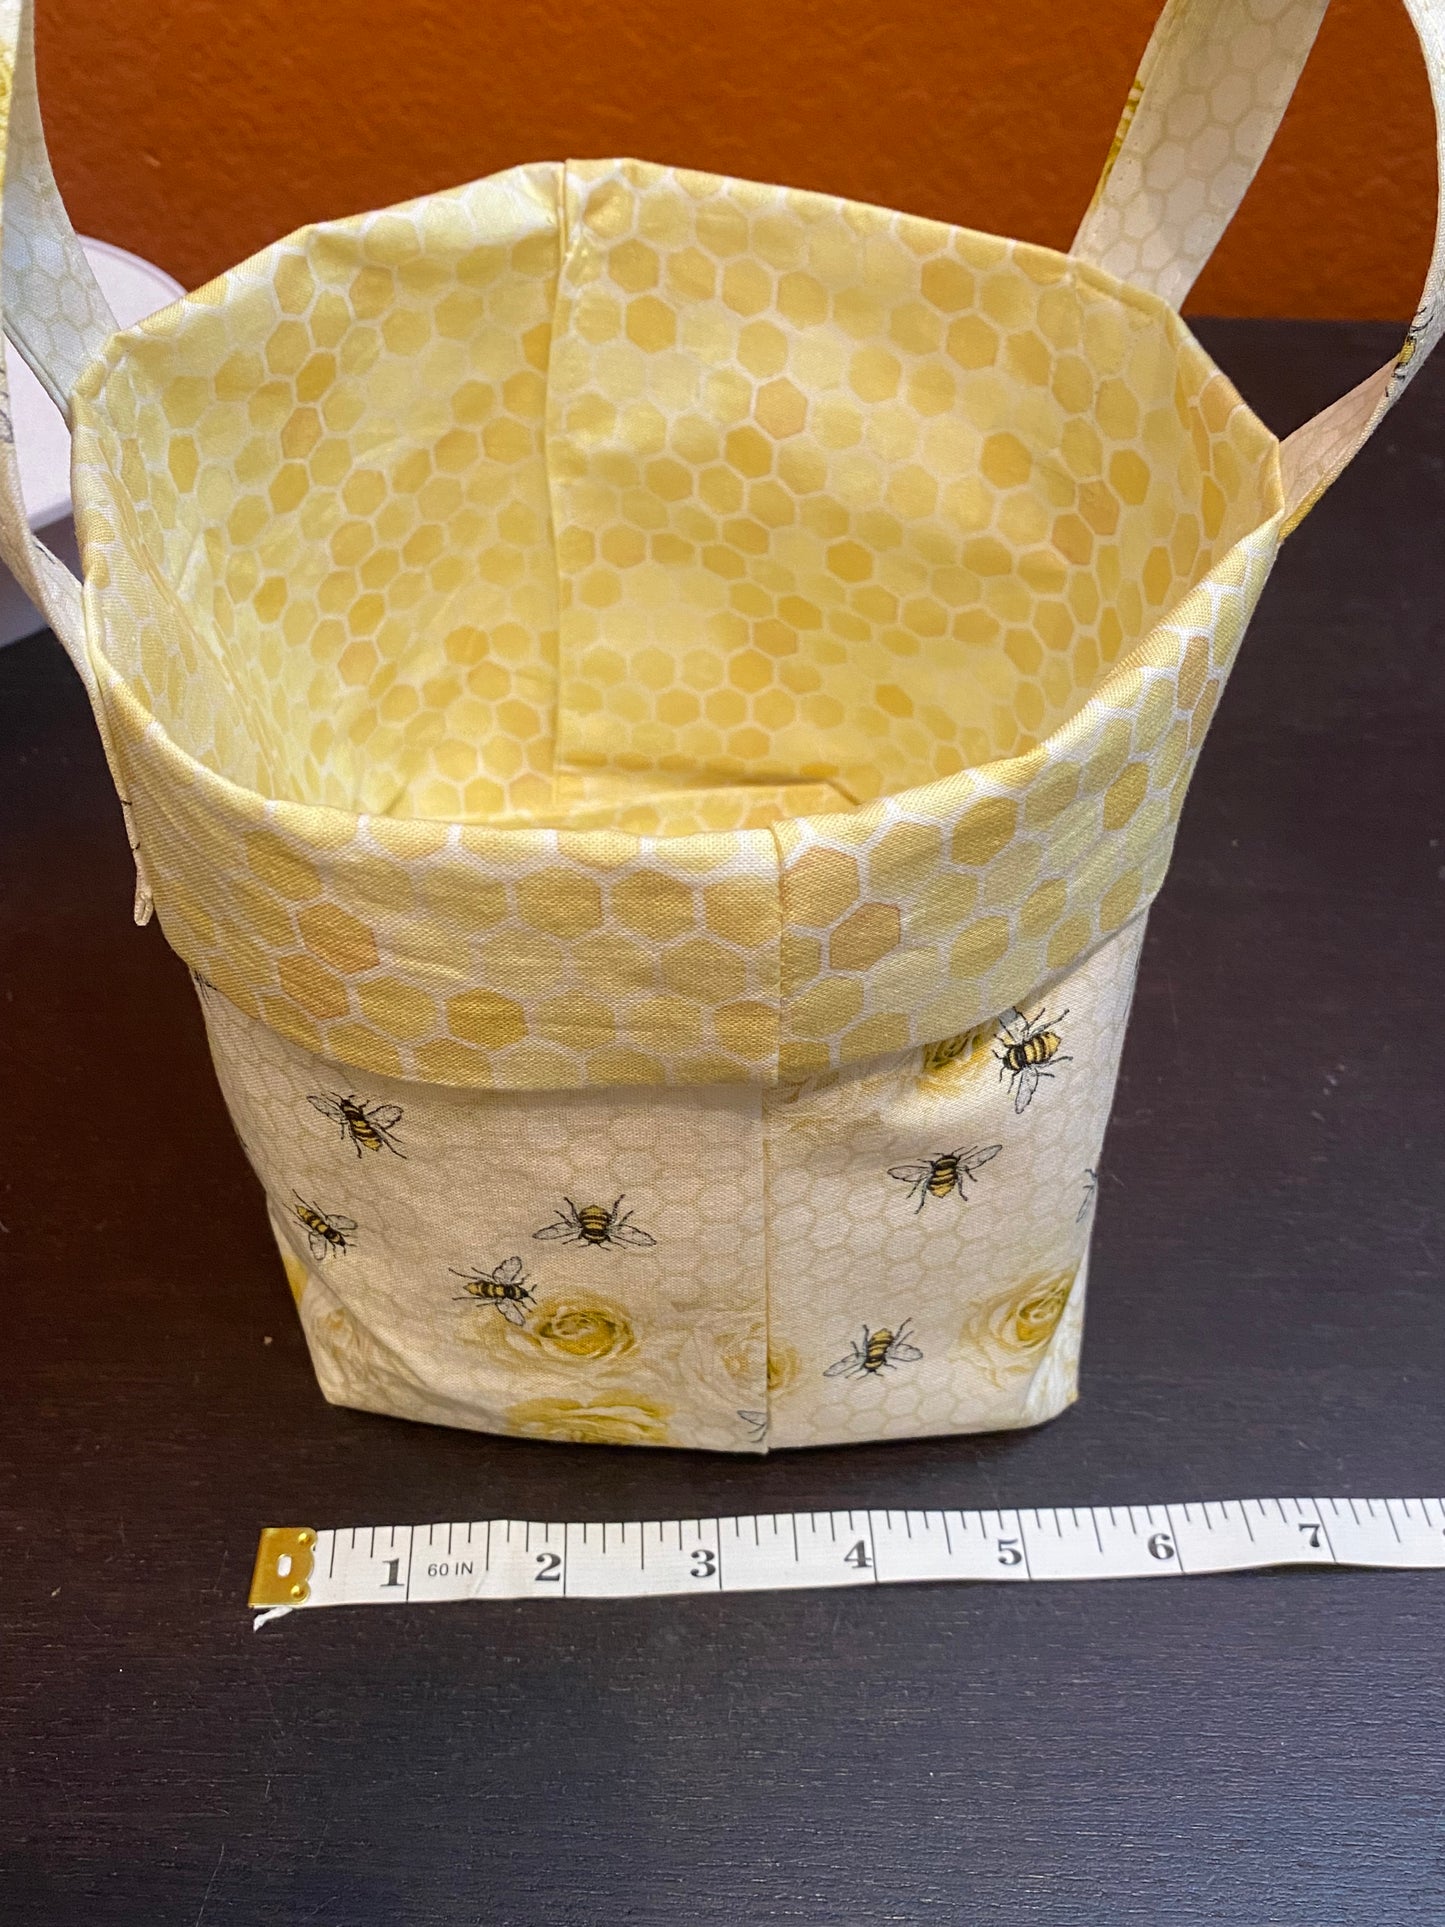 Honeybees and roses on honeycomb fabric basket